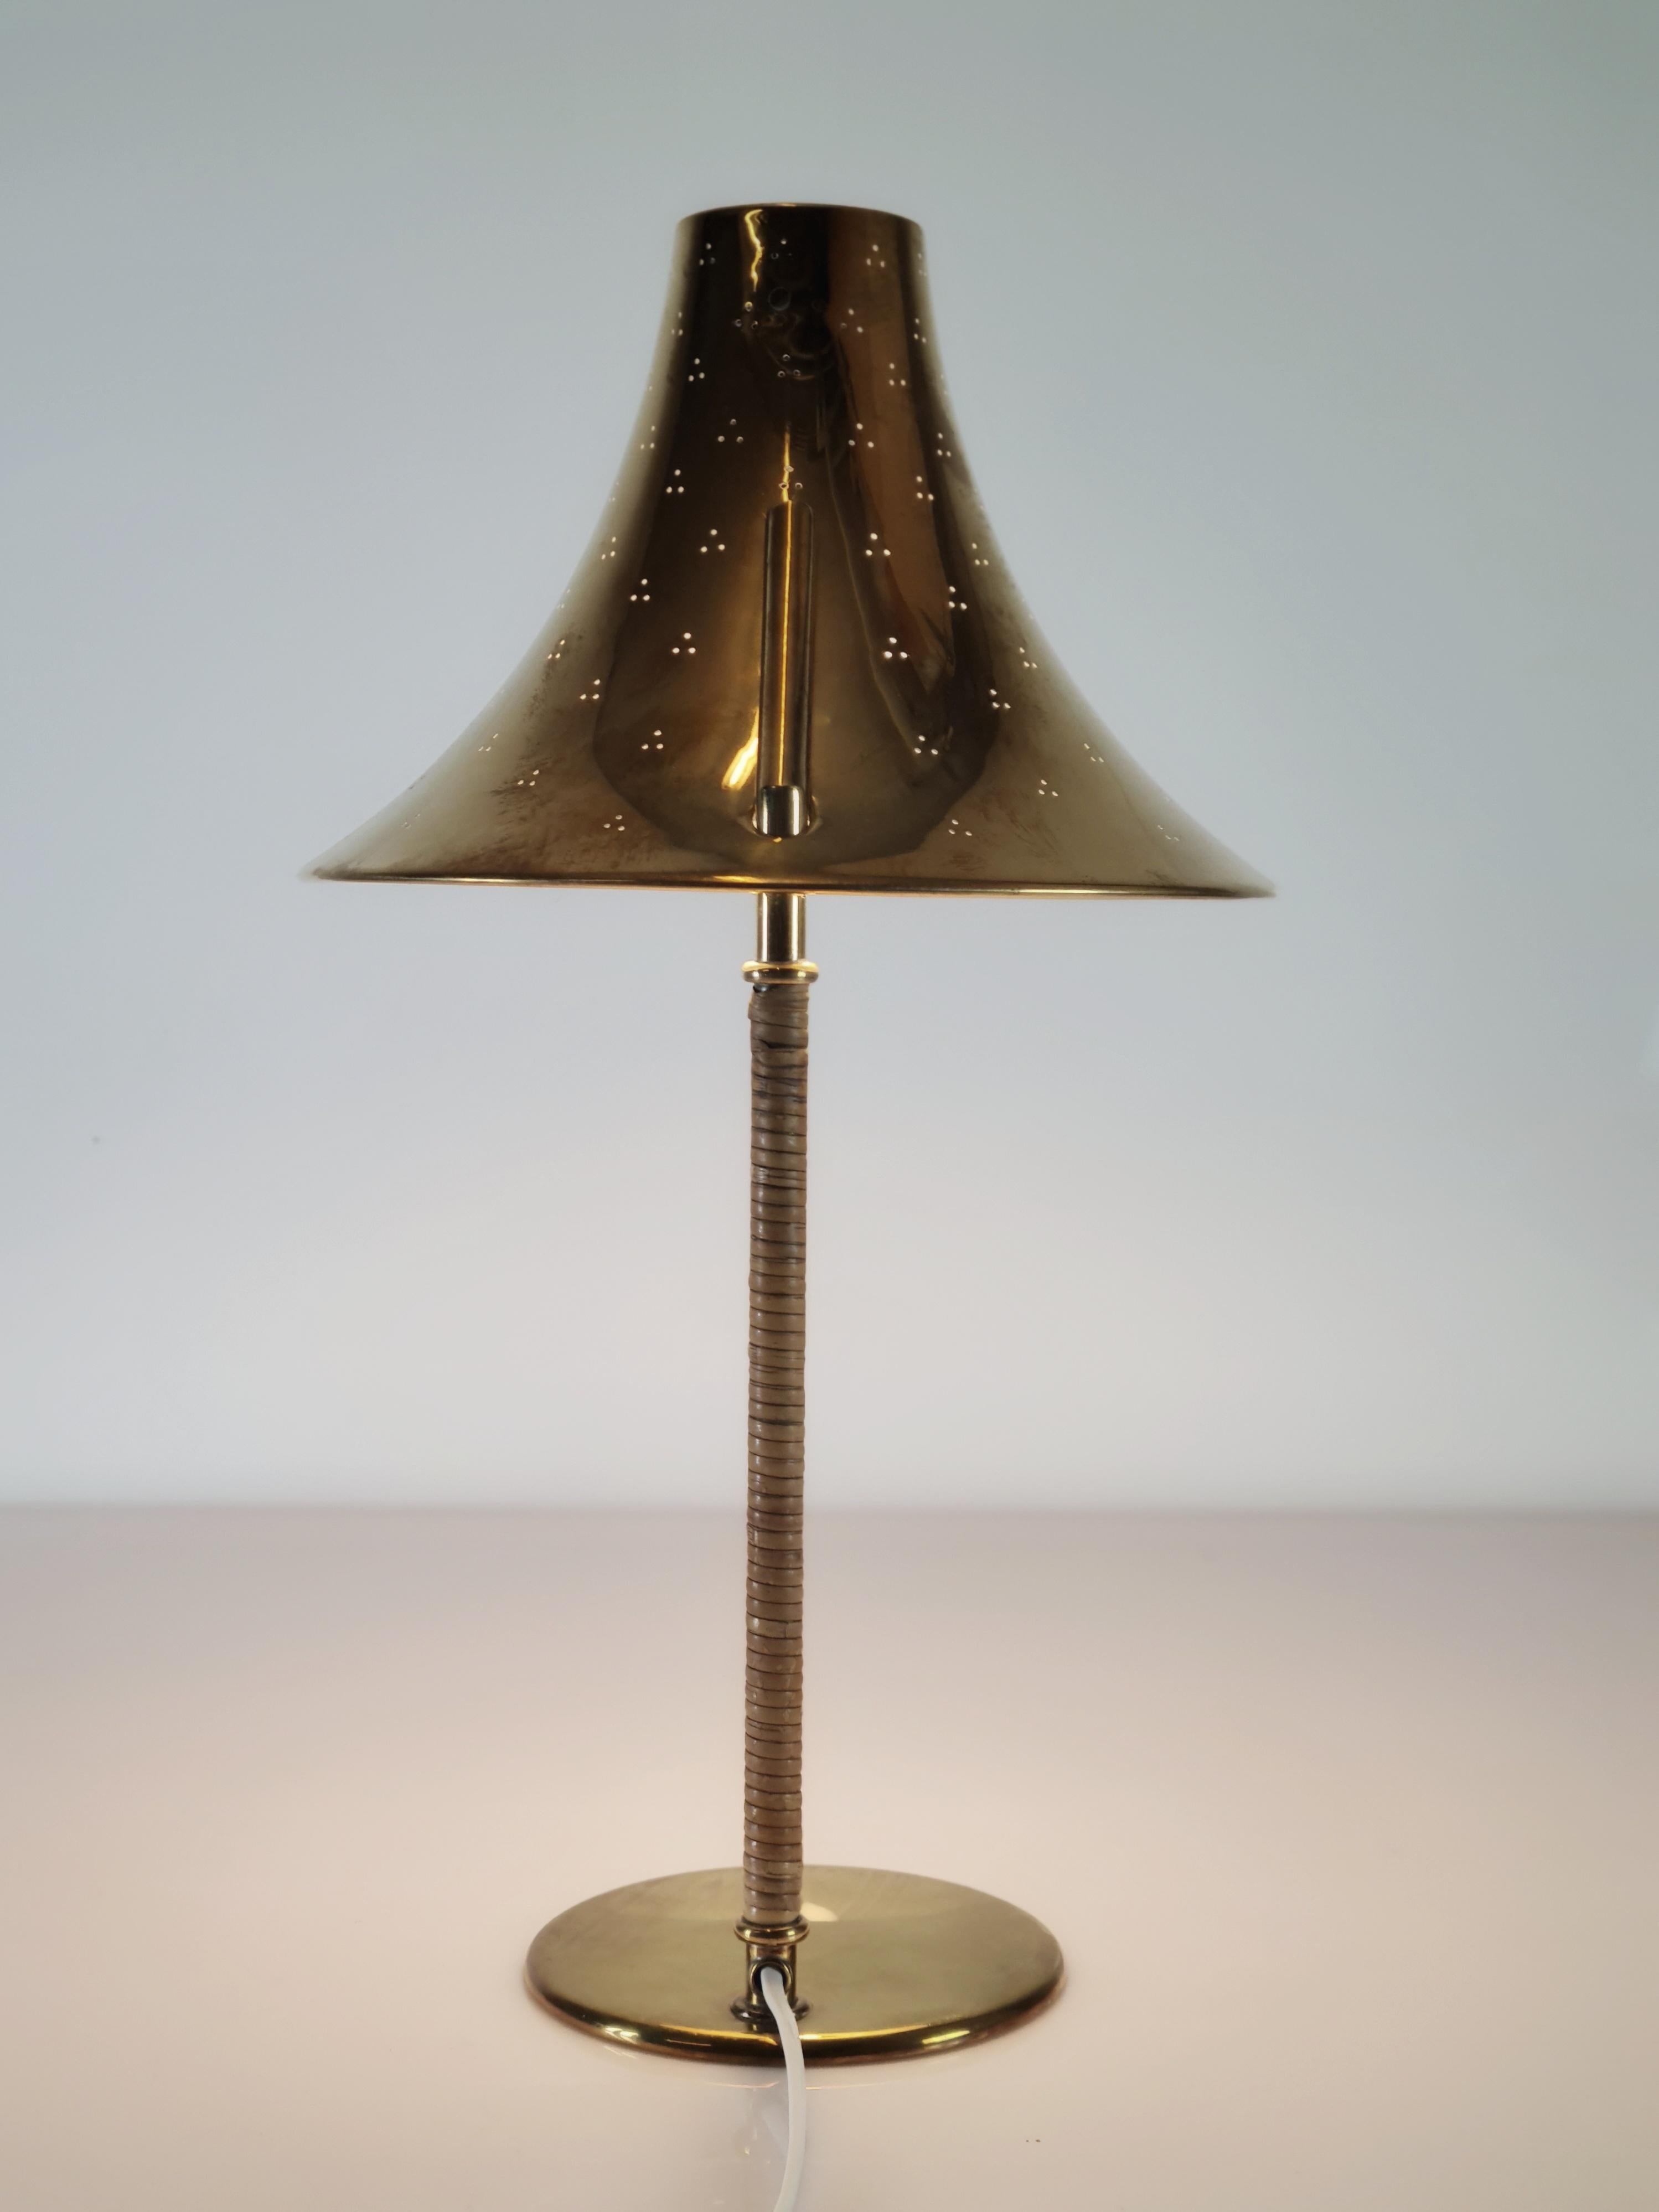 The distinctive reflector on this iconic Paavo Tynell table lamp gave it a few nicknames such as the cow's bell, church bell, hat lamp or even Snufkin after the character in the Moomins by Tove Jansson.

Part of the most sought after catalouged